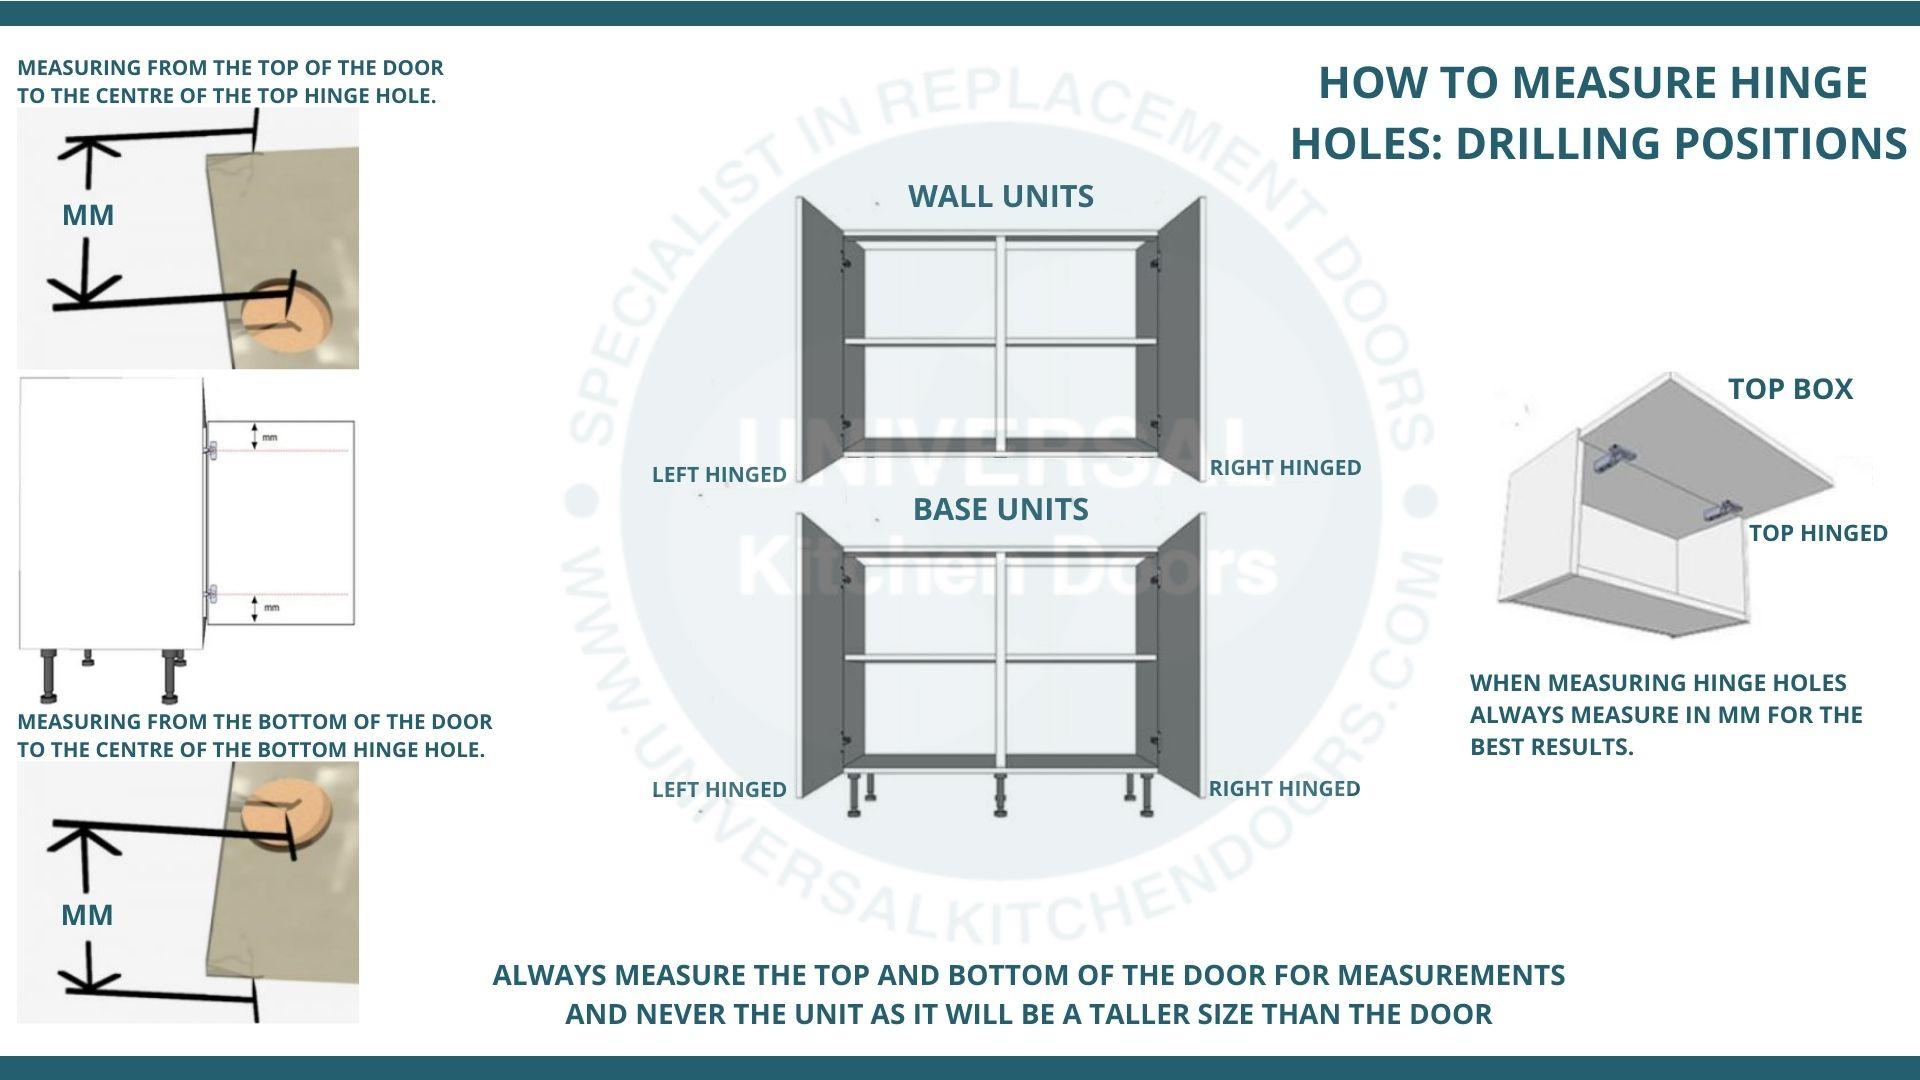 how-to-measure-hinge-holes-drilling-positions.jpg